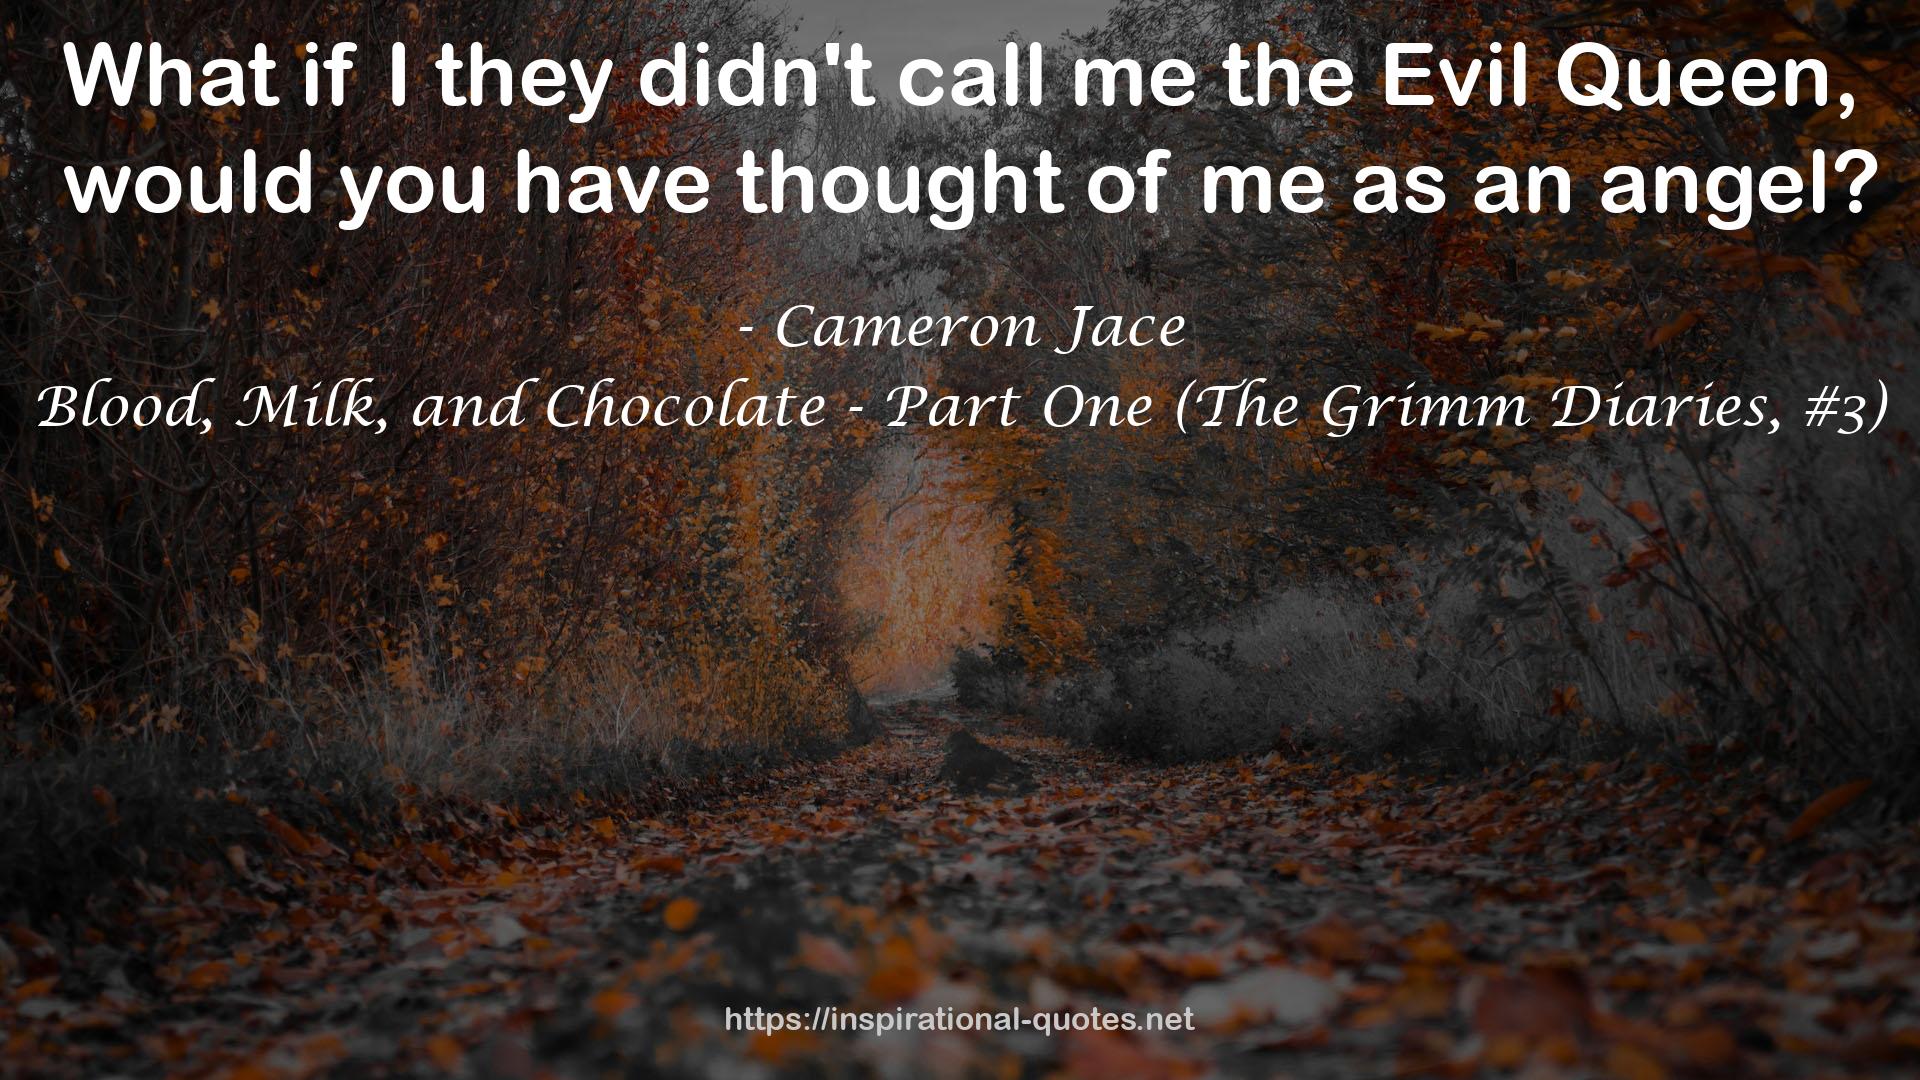 Blood, Milk, and Chocolate - Part One (The Grimm Diaries, #3) QUOTES